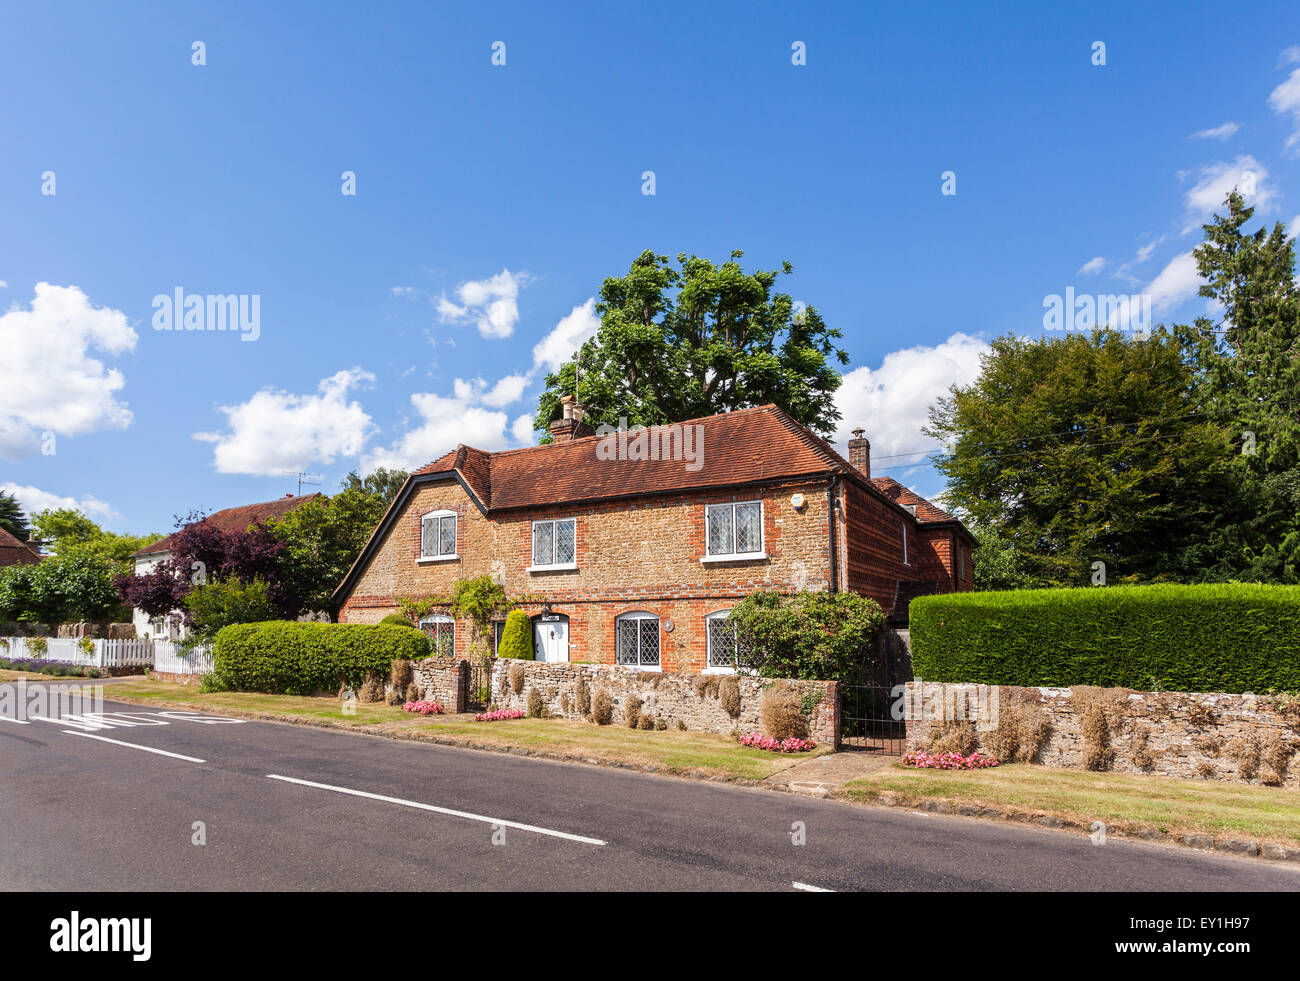 Pretty old roadside cottage in Eashing, Shackleford, a small village in Surrey, south-east England on a summer's day with blue sky Stock Photo